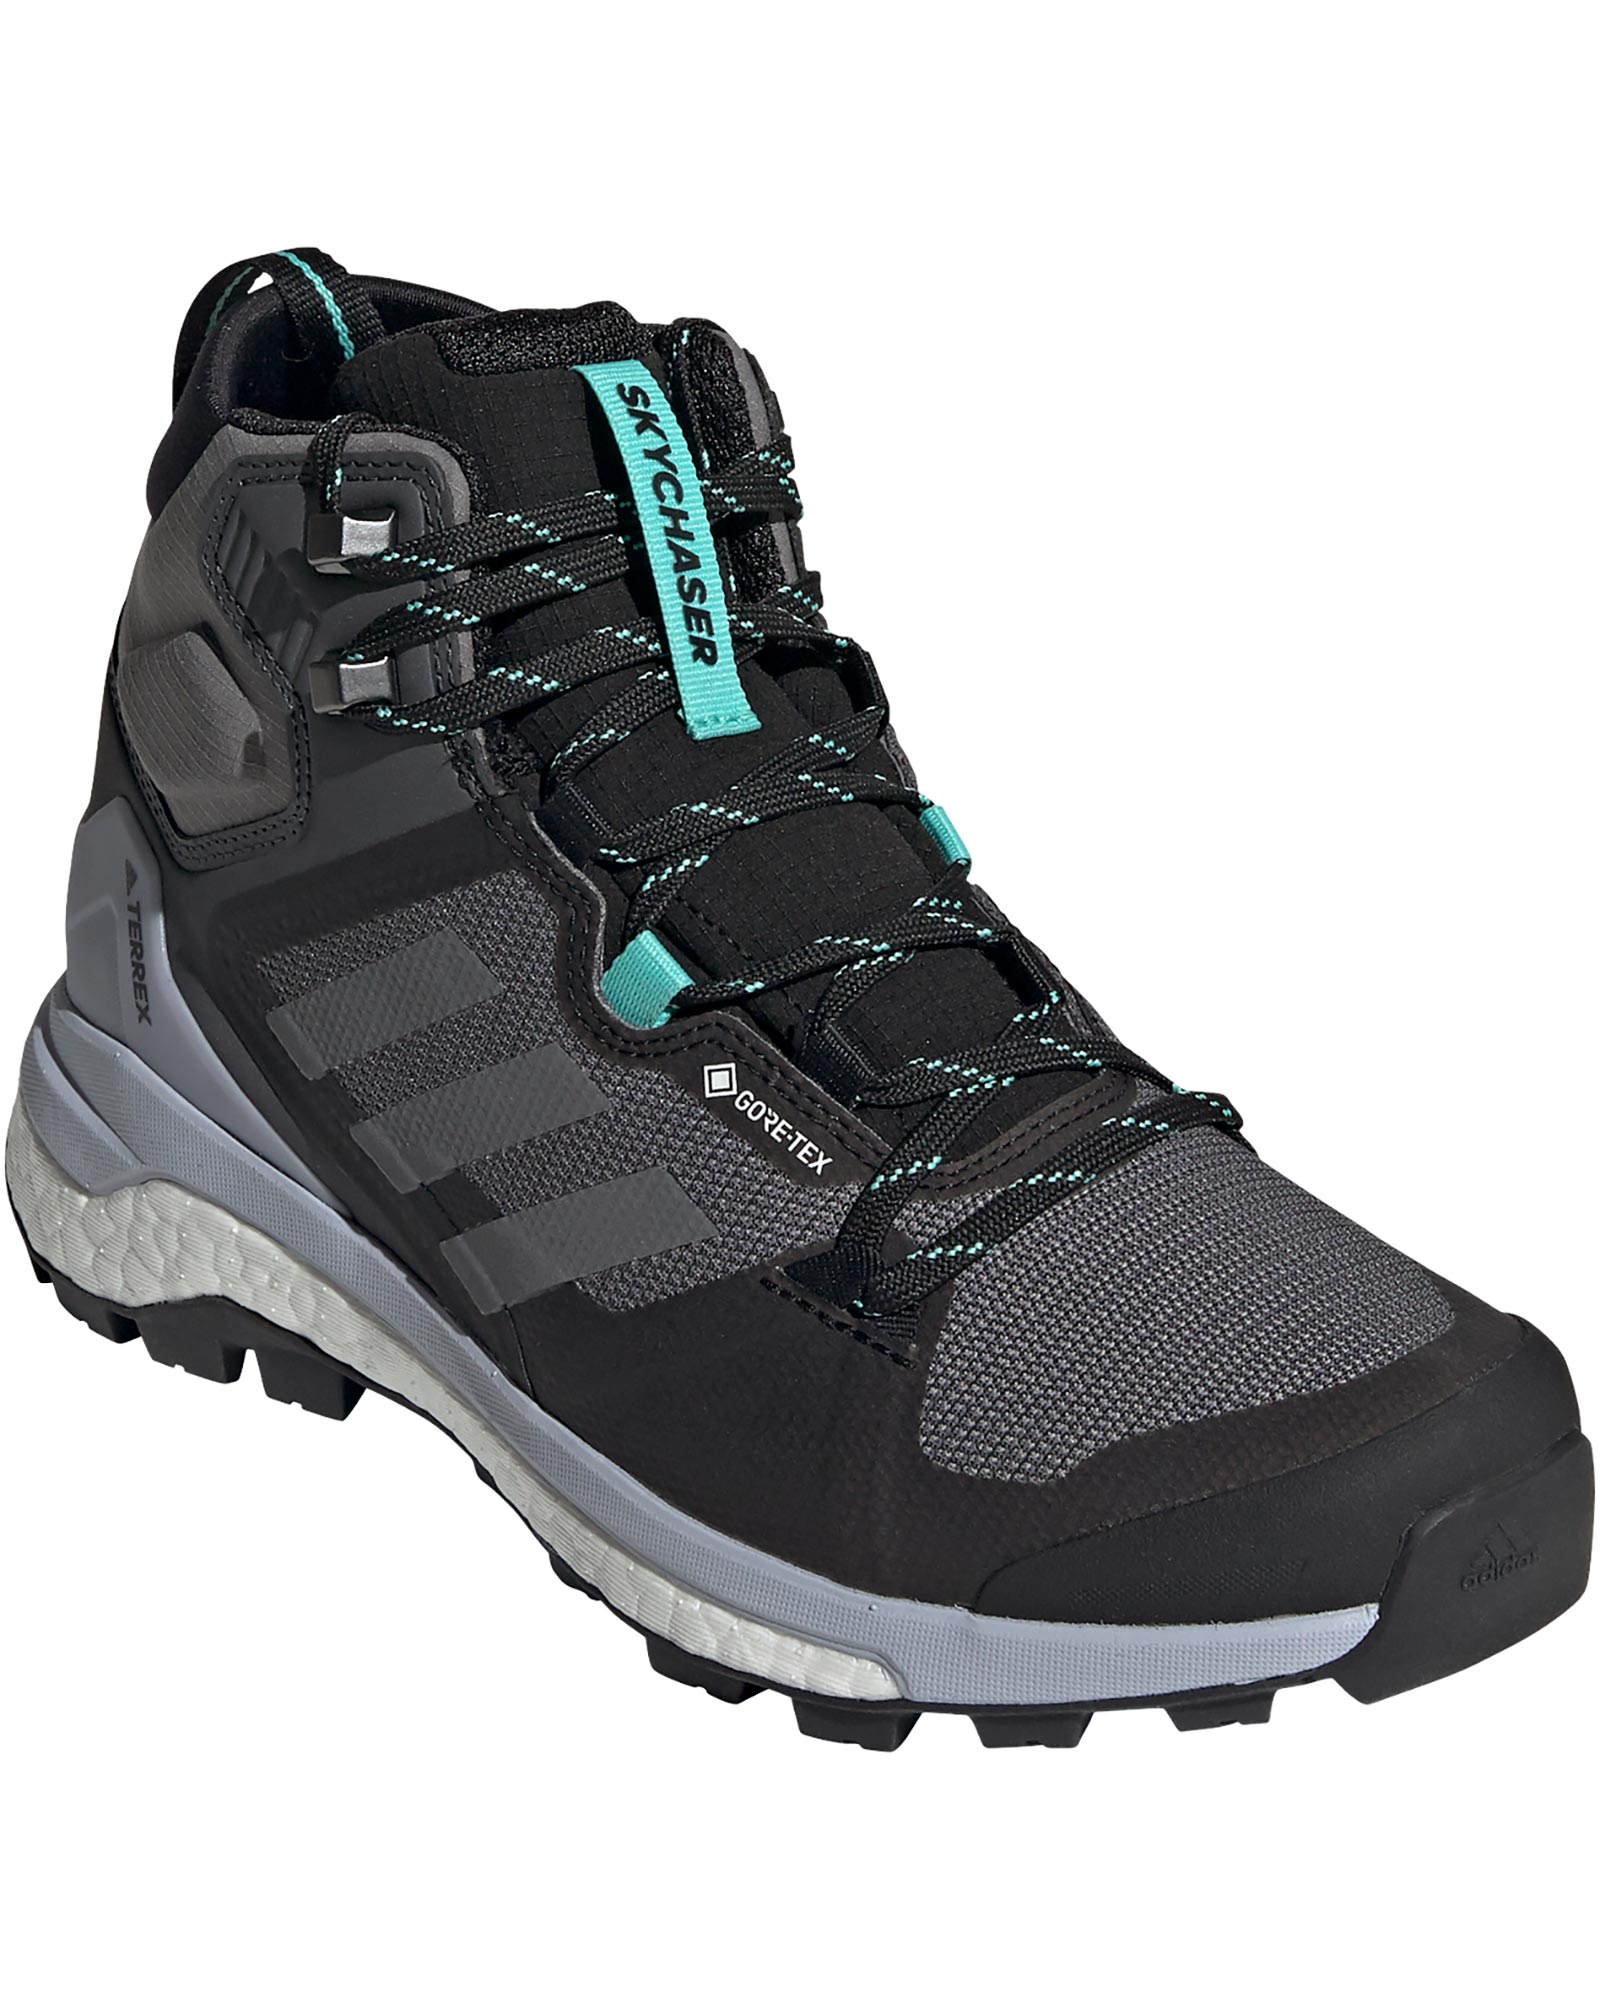 Product image of adidas Terrex Skychaser 2 Mid GORe-TeX Women's Boots